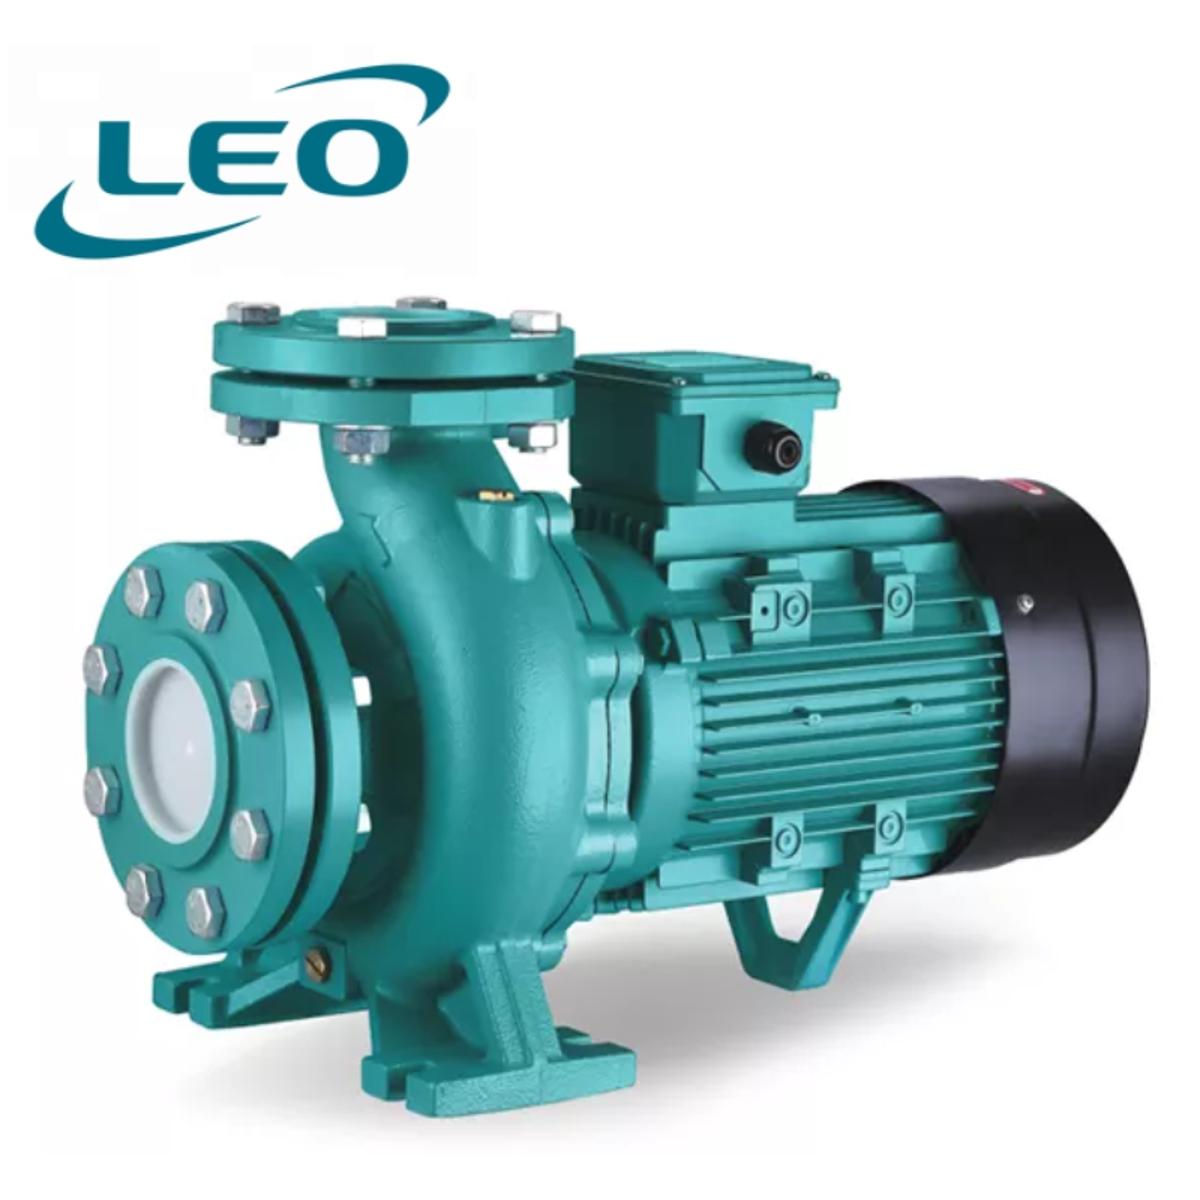 LEO - XST-32-200-40 - 4000 W - 4.0 HP - Clean Water HEAVY DUTY Centrifugal Pump With FLANGES  - 380V~400V THREE PHASE - SIZE :- 2" x 1 1-4 " - European STANDARD